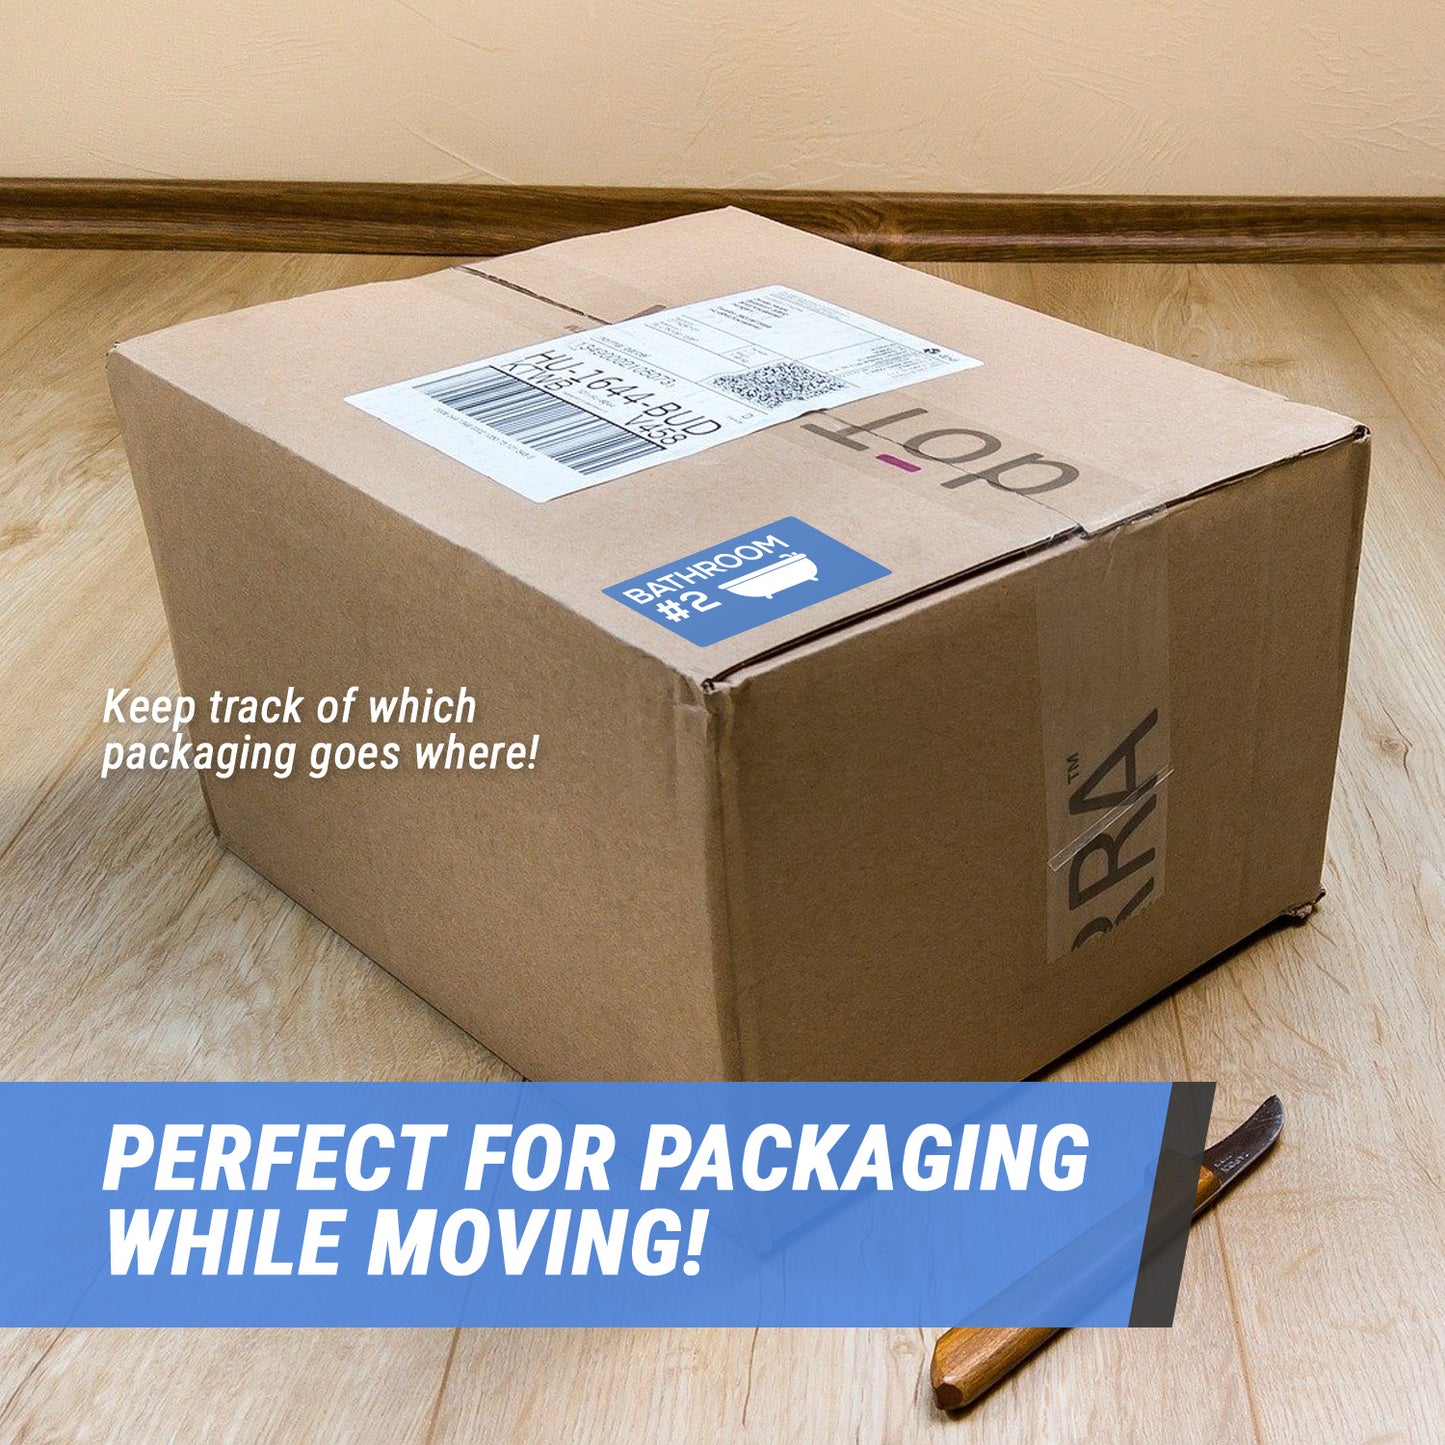 4 x 2 inch | Moving & Packing: Bathroom #2 Stickers